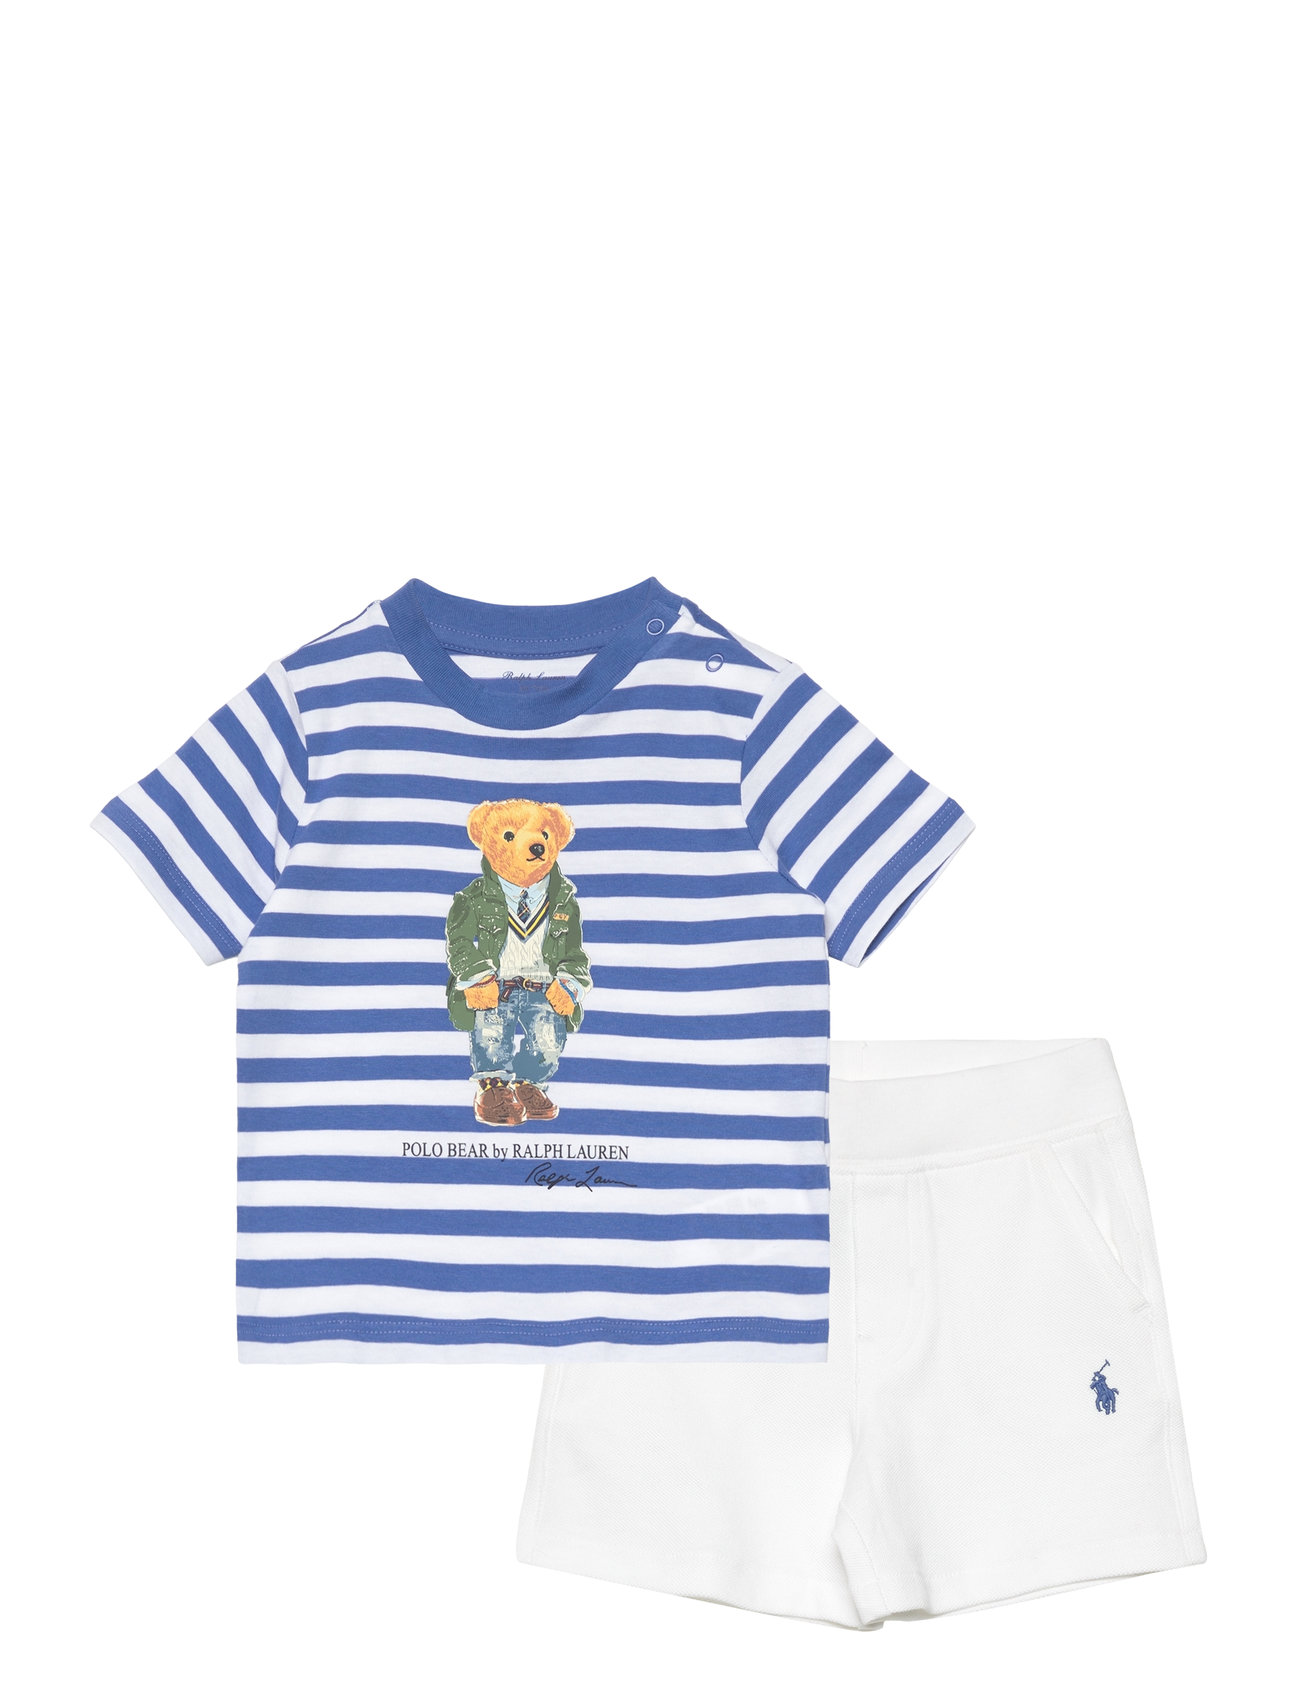 Polo Bear Cotton Tee & Mesh Short Set Sets Sets With Short-sleeved T-shirt Multi/patterned Ralph Lauren Baby